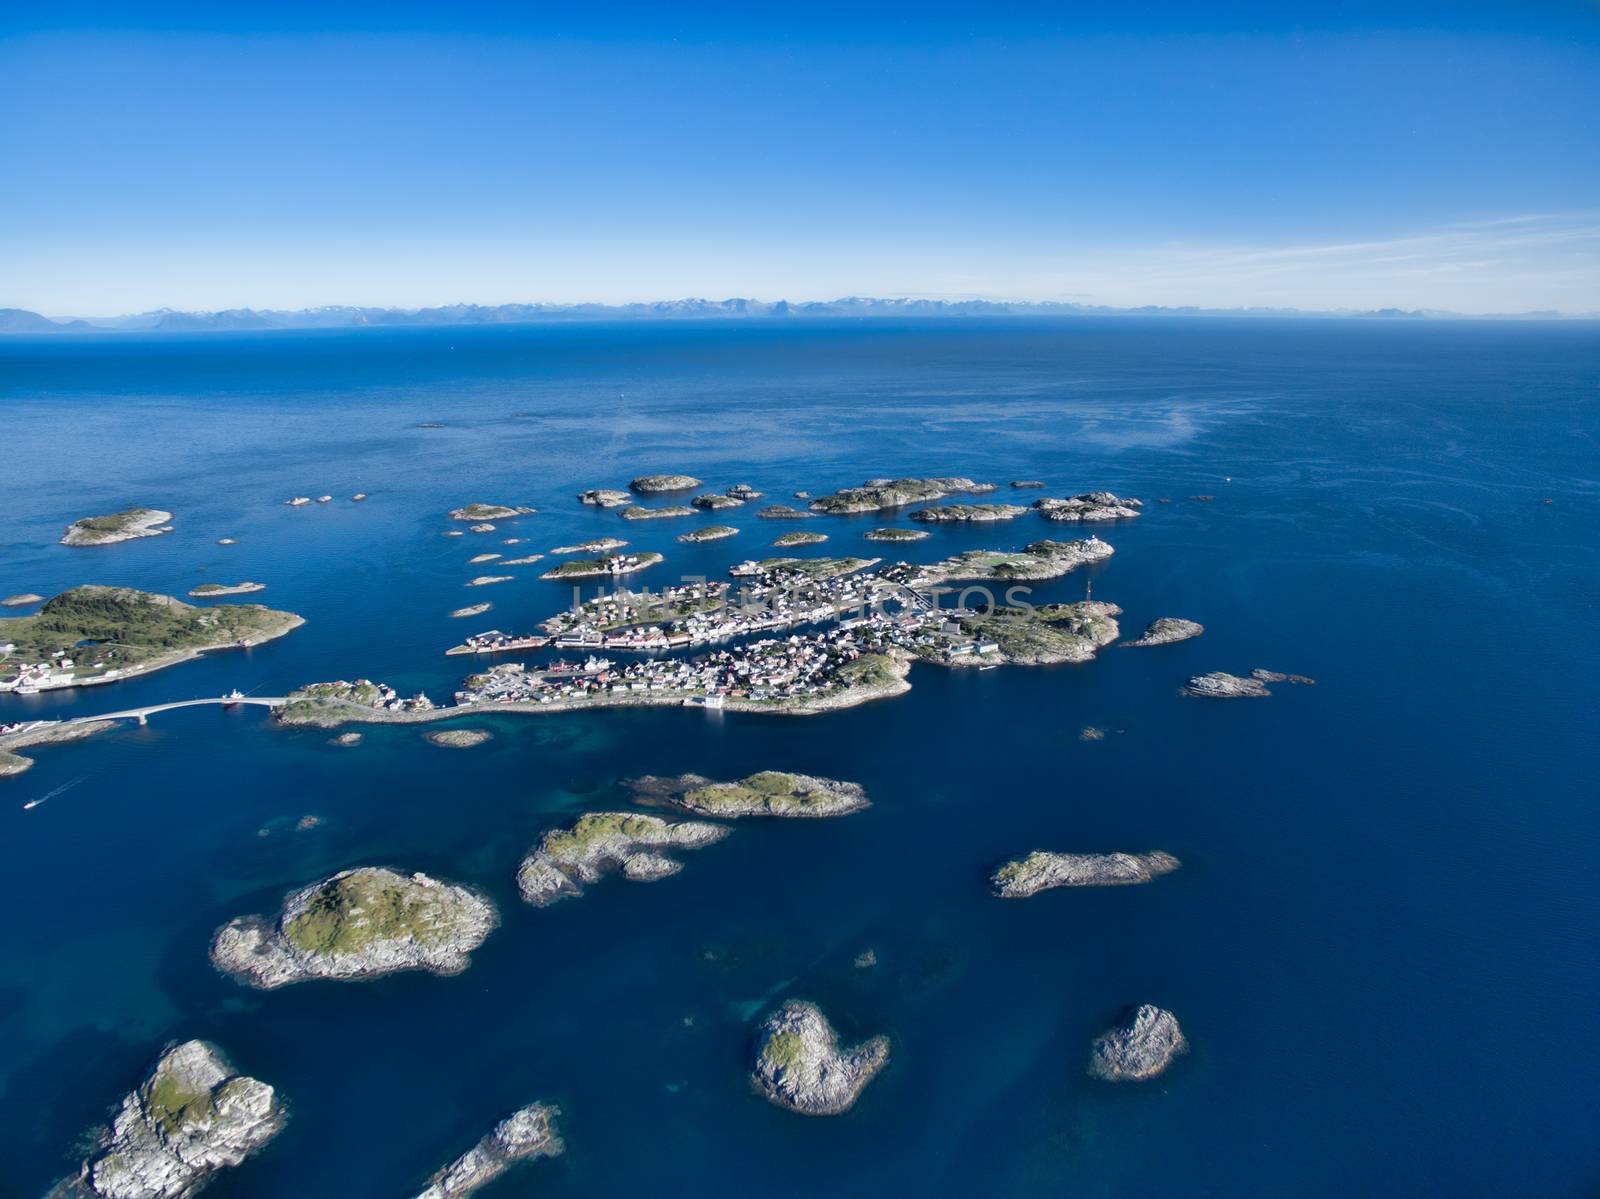 Aerial view of picturesque fishing port Henningsvaer on small islets in the sea